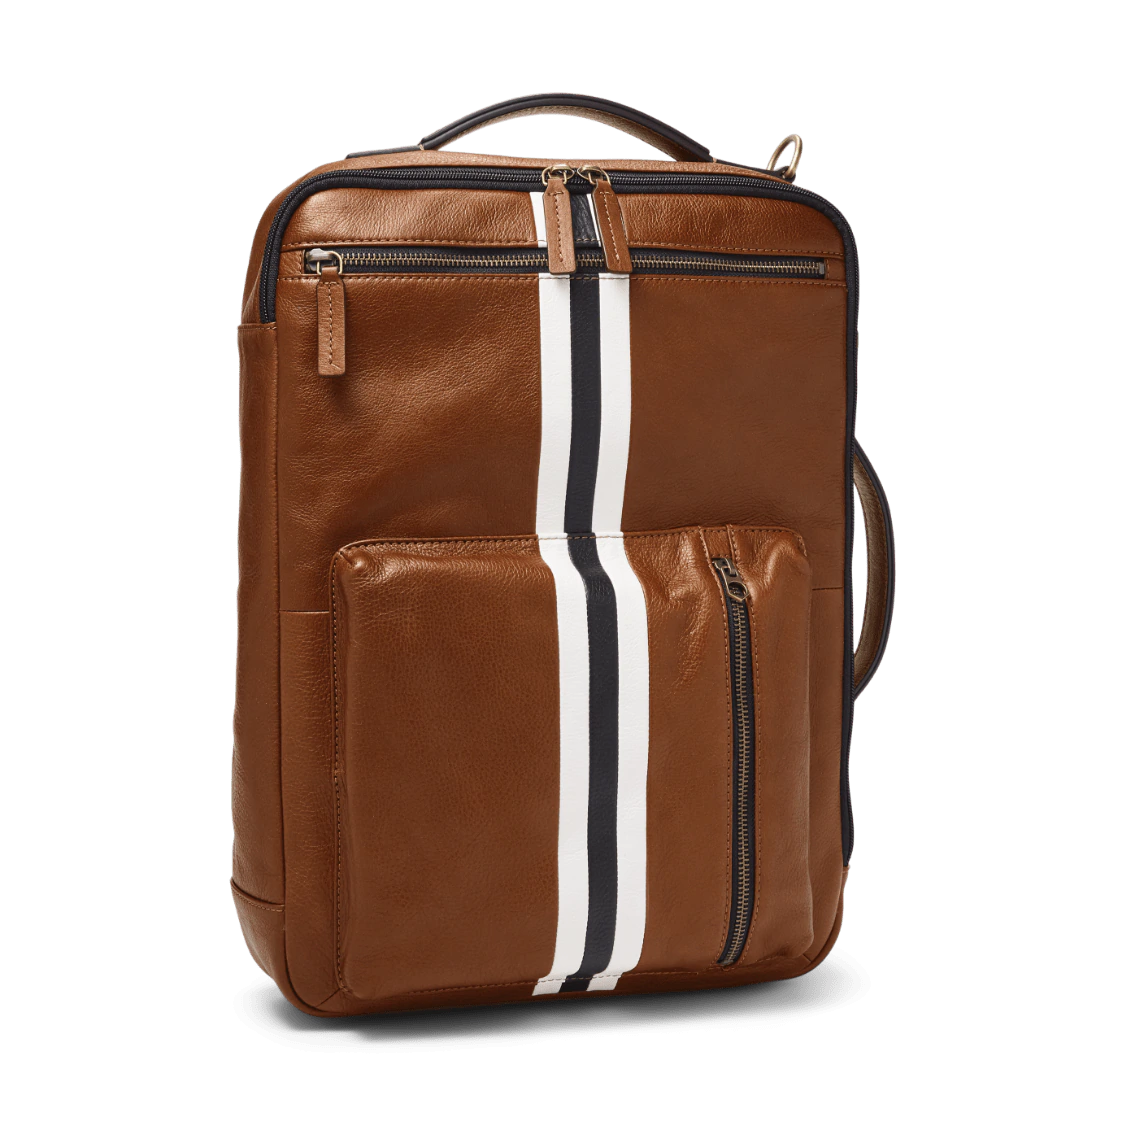 Business Backpack PNG Image Background